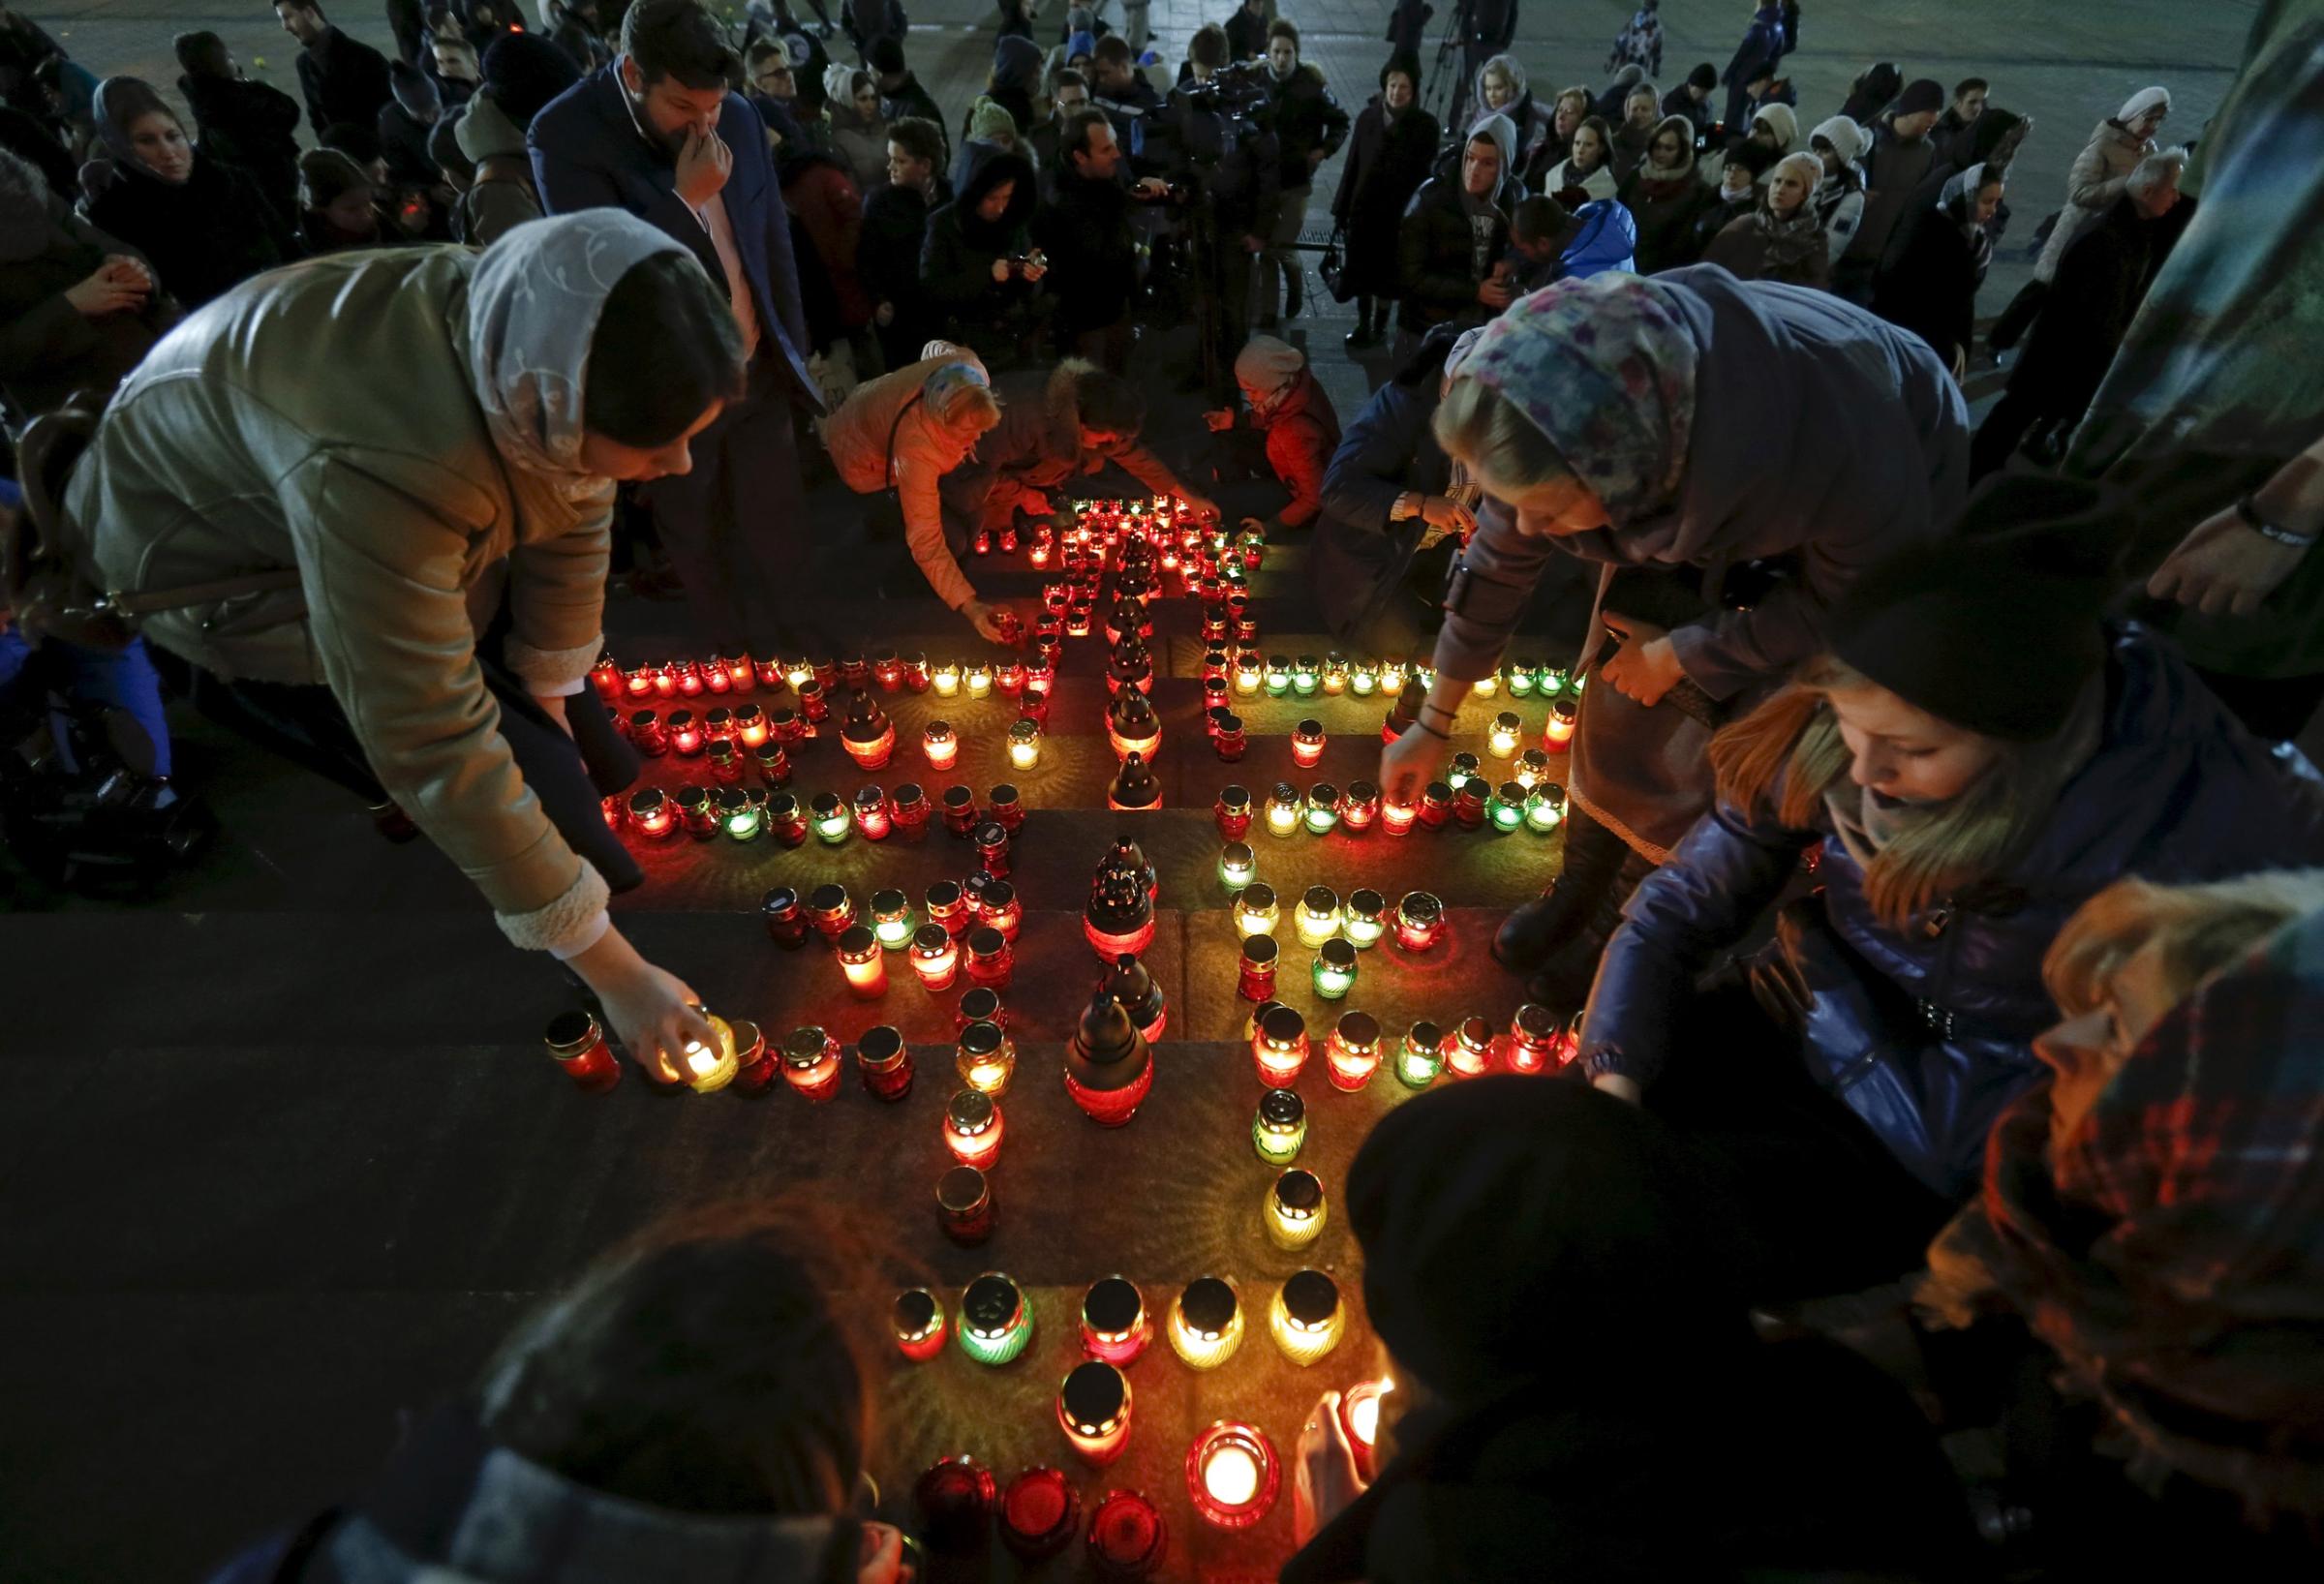 People arrange candles to make a cross to commemorate 224 victims of a Russian airliner which crashed in Egypt, on the stairs of the Christ the Saviour Cathedral in Moscow, Russia, November 1, 2015. An Airbus A321, operated by Russian airline Kogalymavia under the brand name Metrojet, carrying 224 passengers crashed into a mountainous area of Egypt's Sinai peninsula on Saturday shortly after losing radar contact near cruising altitude, killing all aboard. Russian President Vladimir Putin declared a day of national mourning for Sunday. REUTERS/Maxim Shemetov - RTX1U9UO